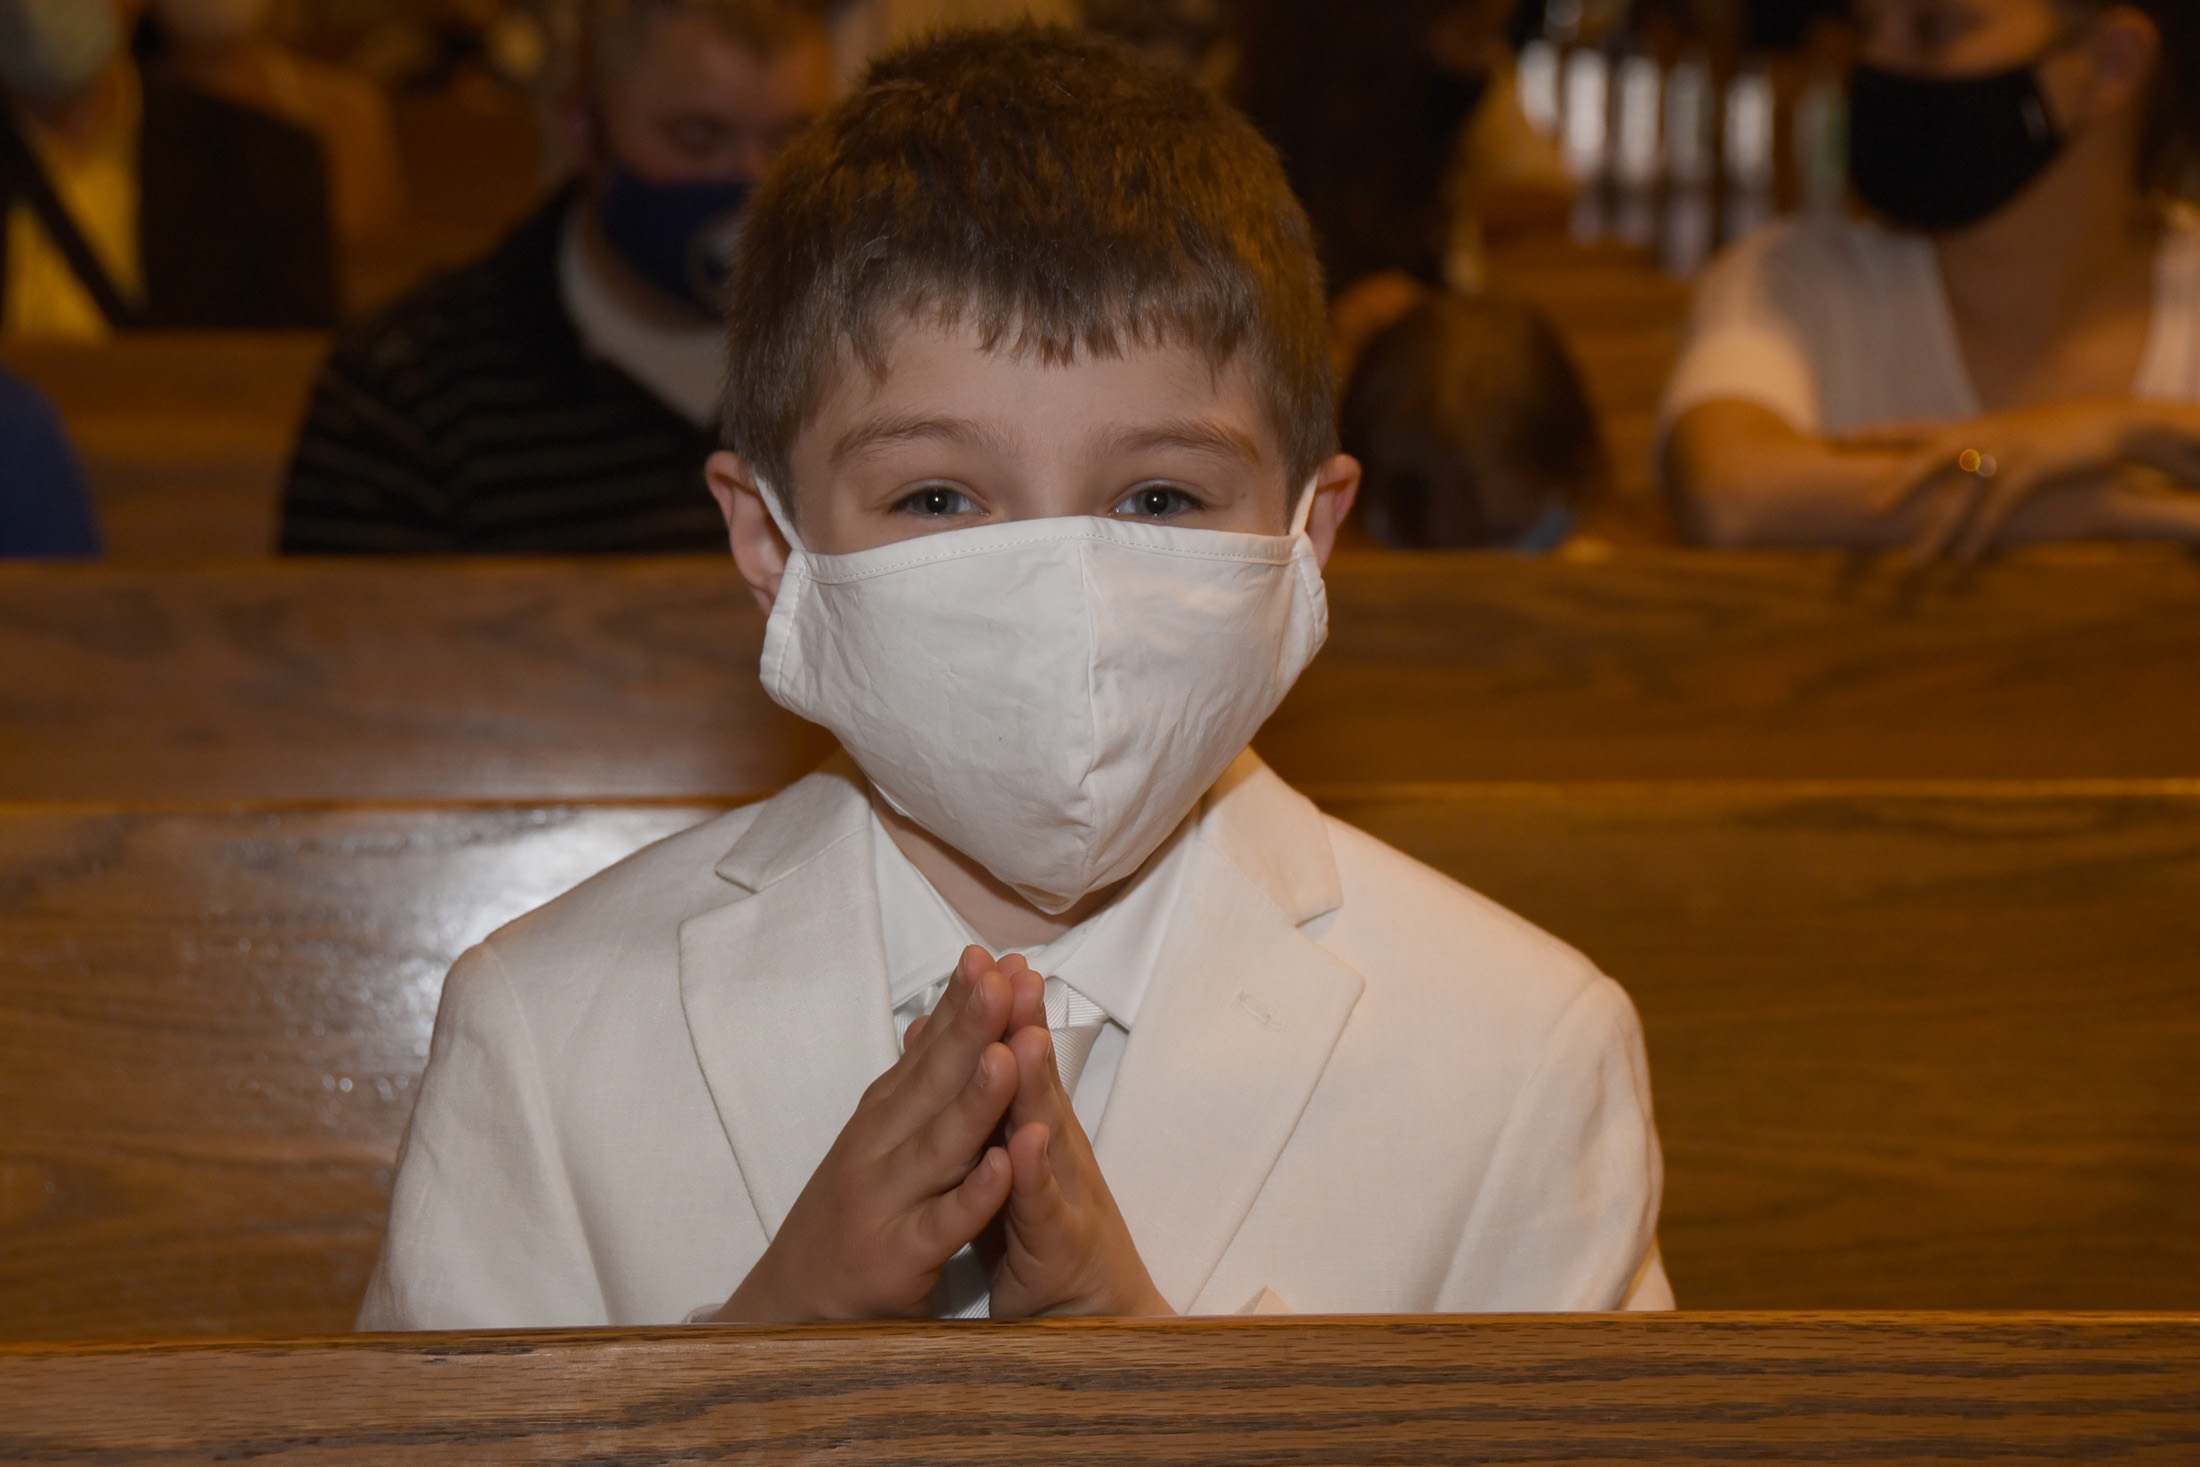 FIRST-COMMUNION-MAY-15-2021-10011025